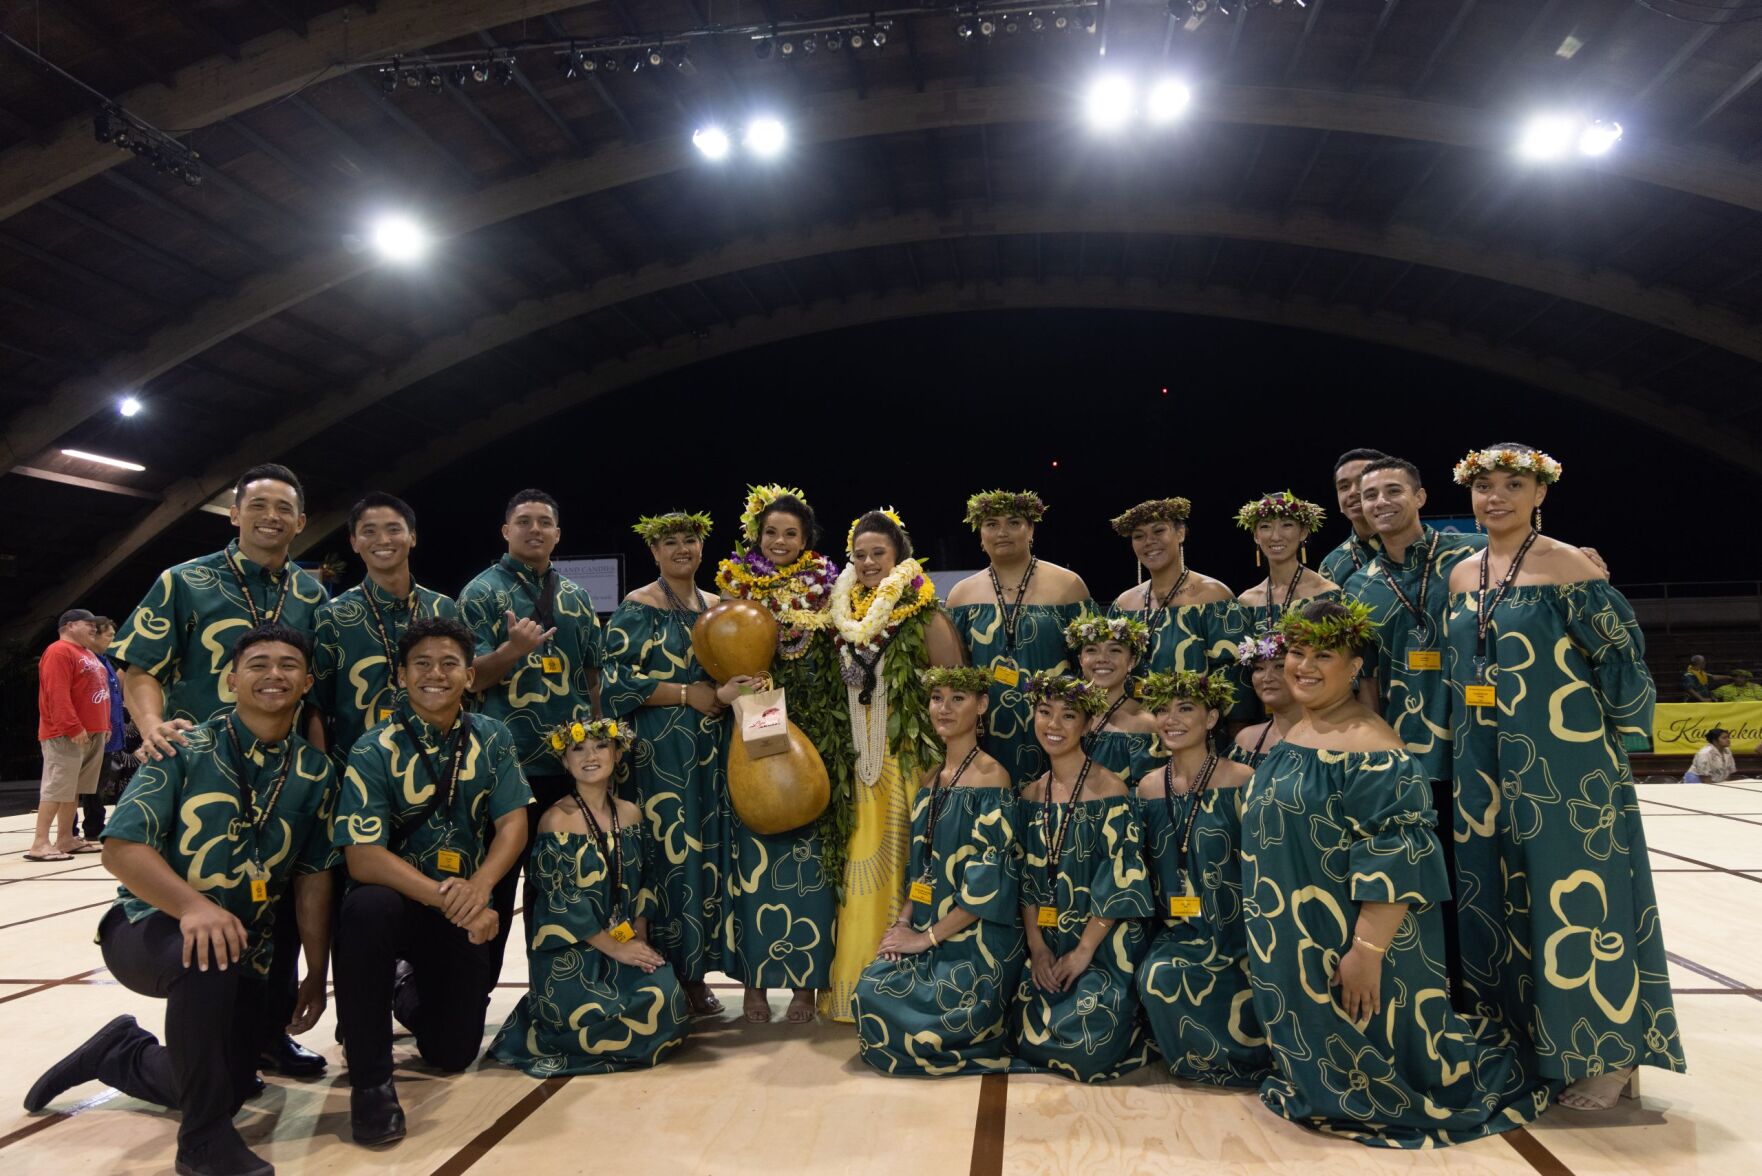 Merrie Monarch Festival Coverage from Hawaii Island Local kitv